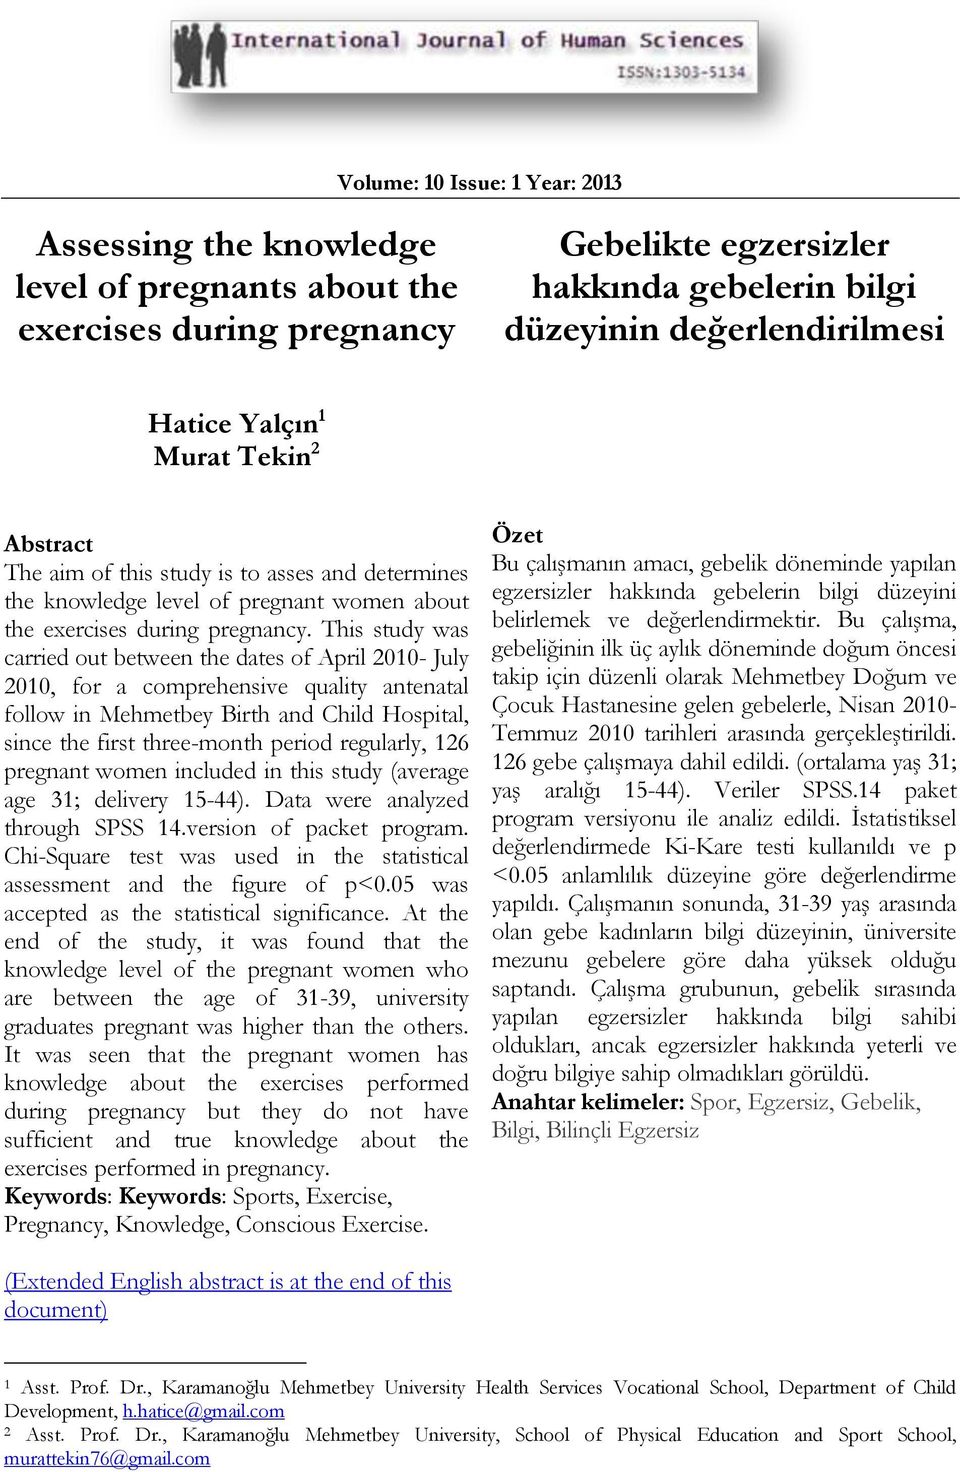 This study was carried out between the dates of April 2010- July 2010, for a comprehensive quality antenatal follow in Mehmetbey Birth and Child Hospital, since the first three-month period